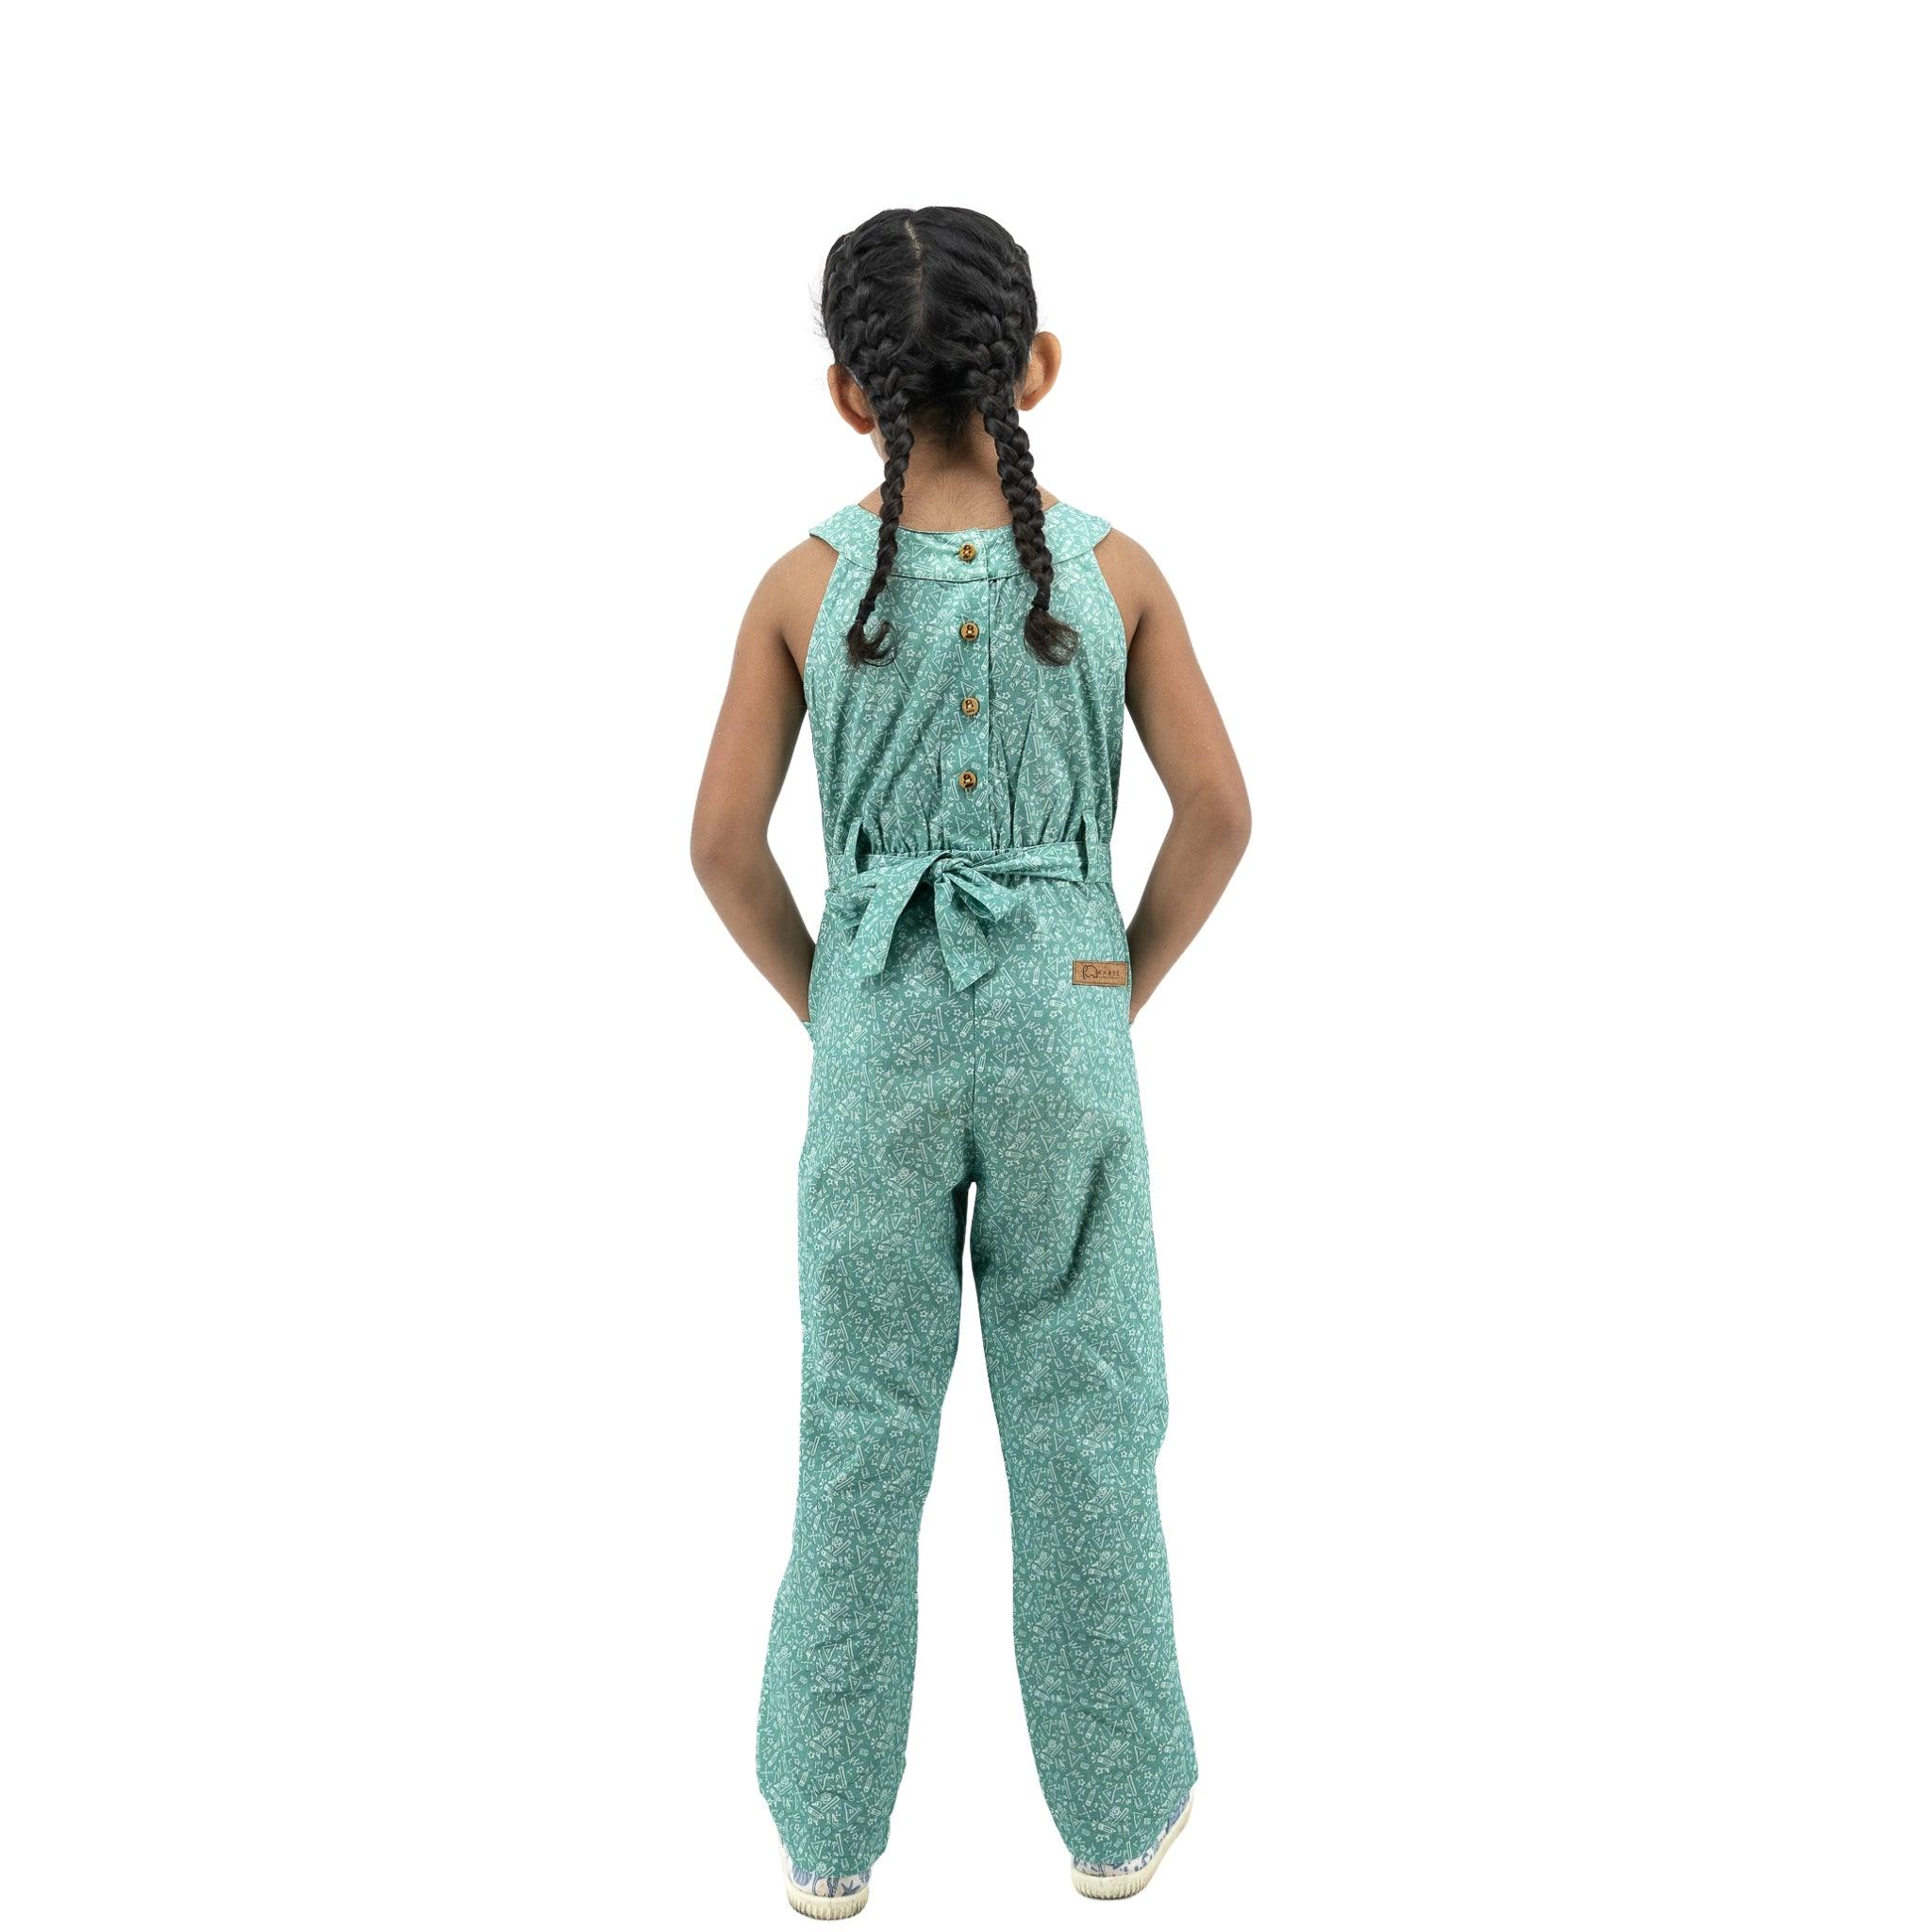 A young girl seen from behind, wearing a Karee Smoke Green Cotton Jumpsuit For Girls and braided hair, standing against a white background.